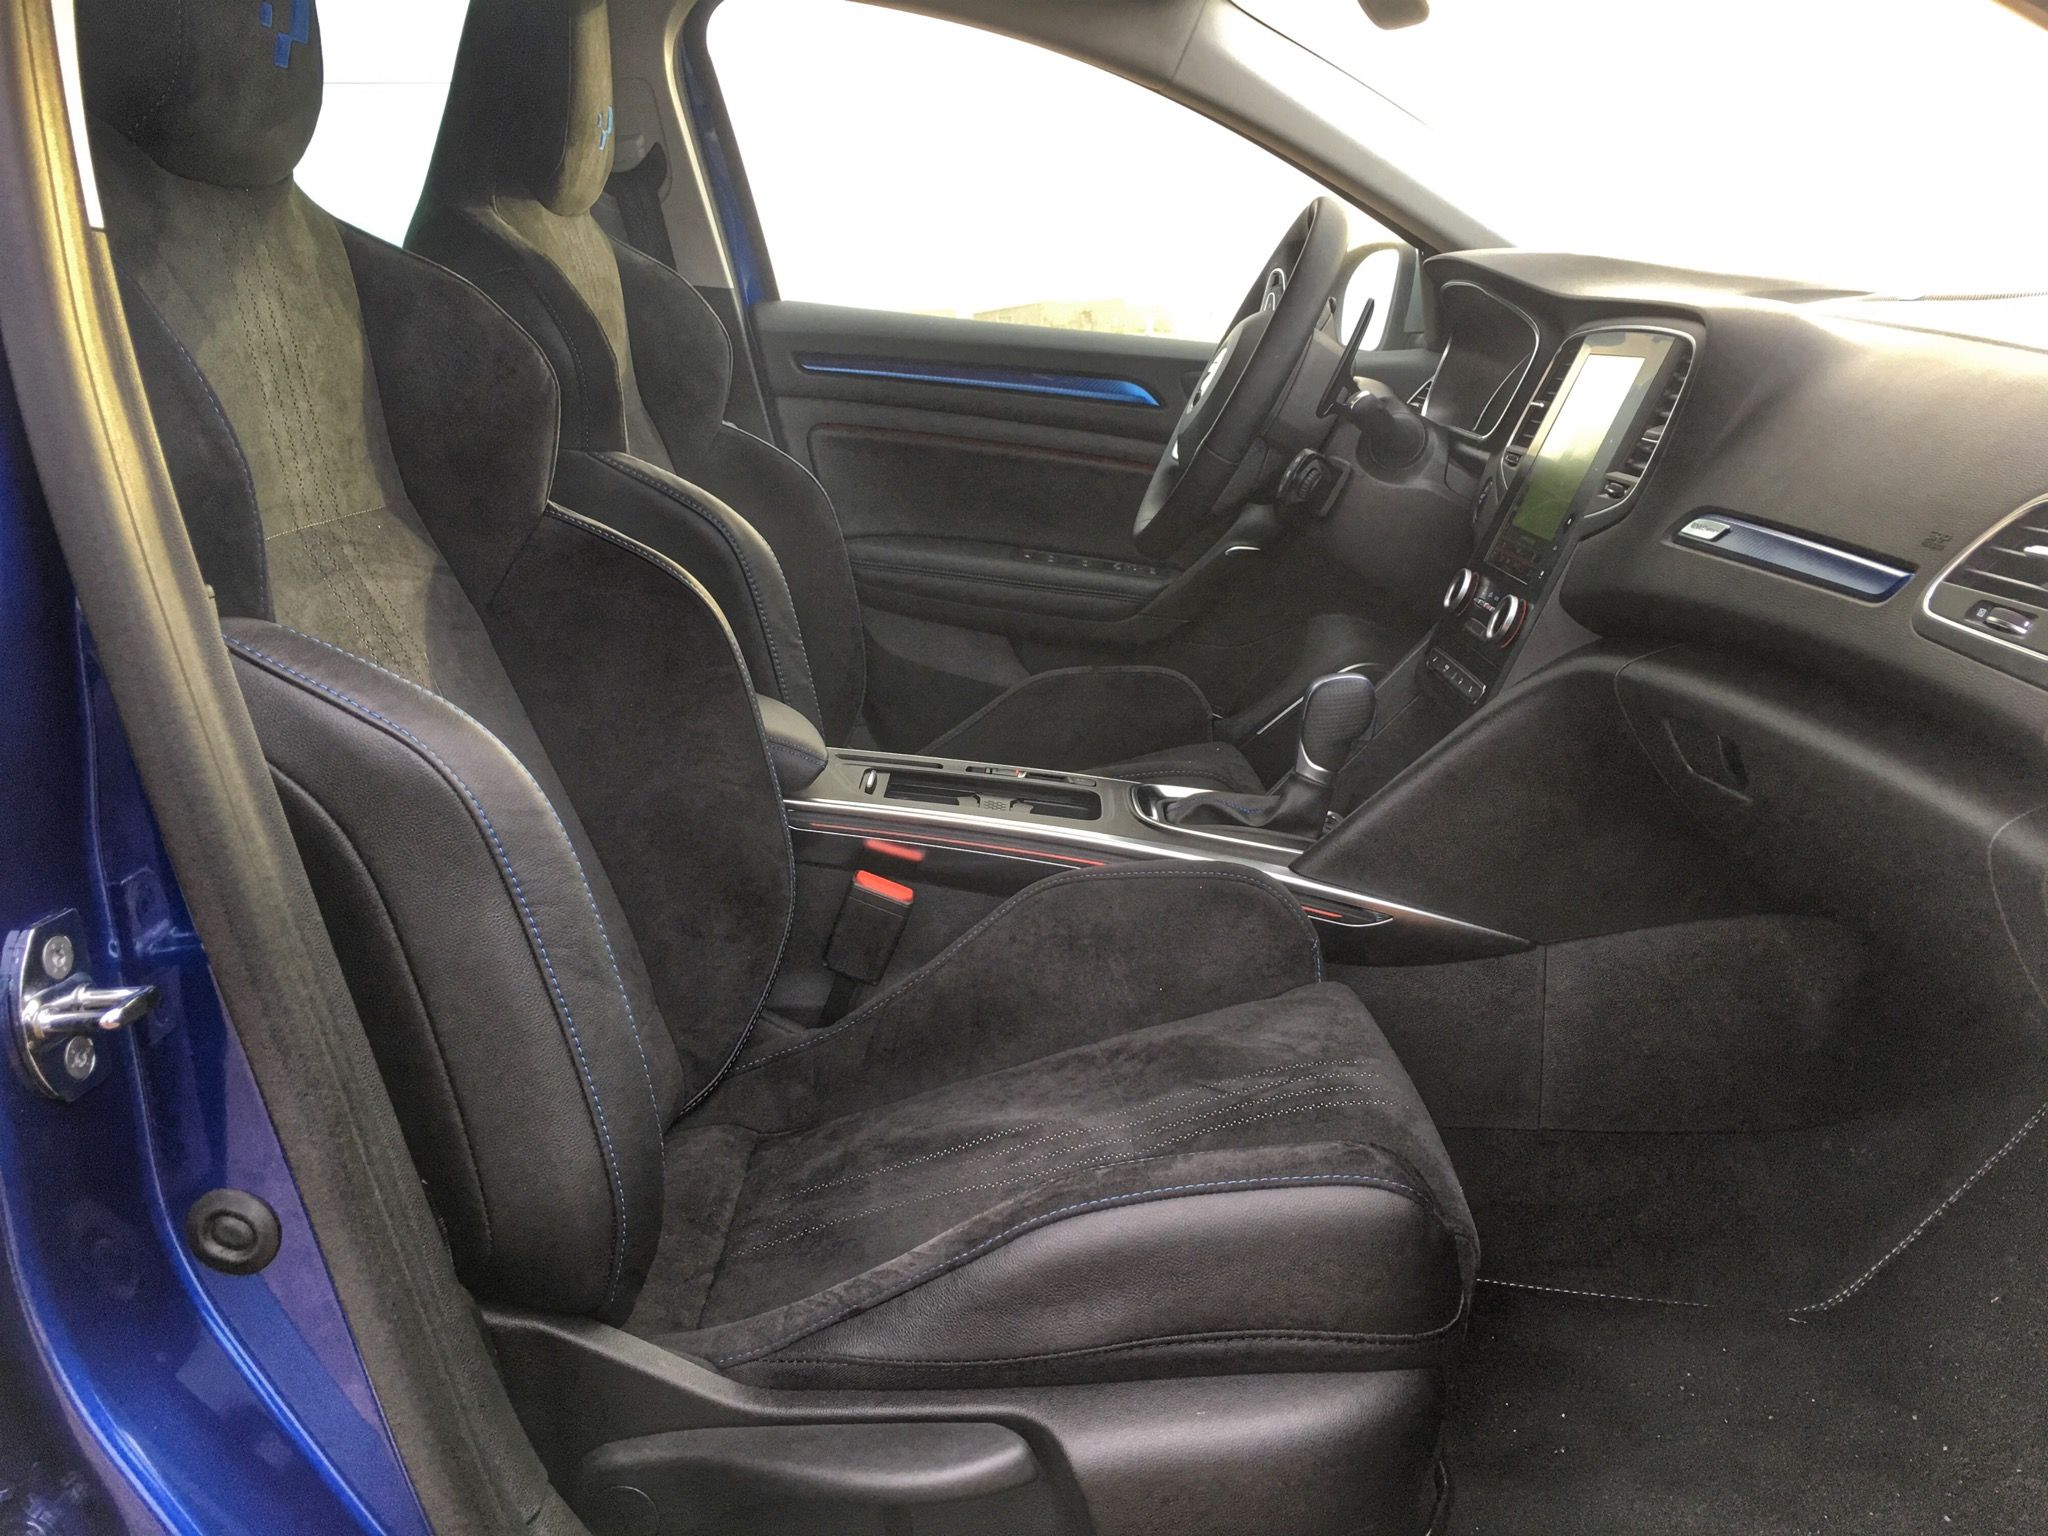 2016 Renault Megane Gt Front Seats Interior (View 21 of 27)